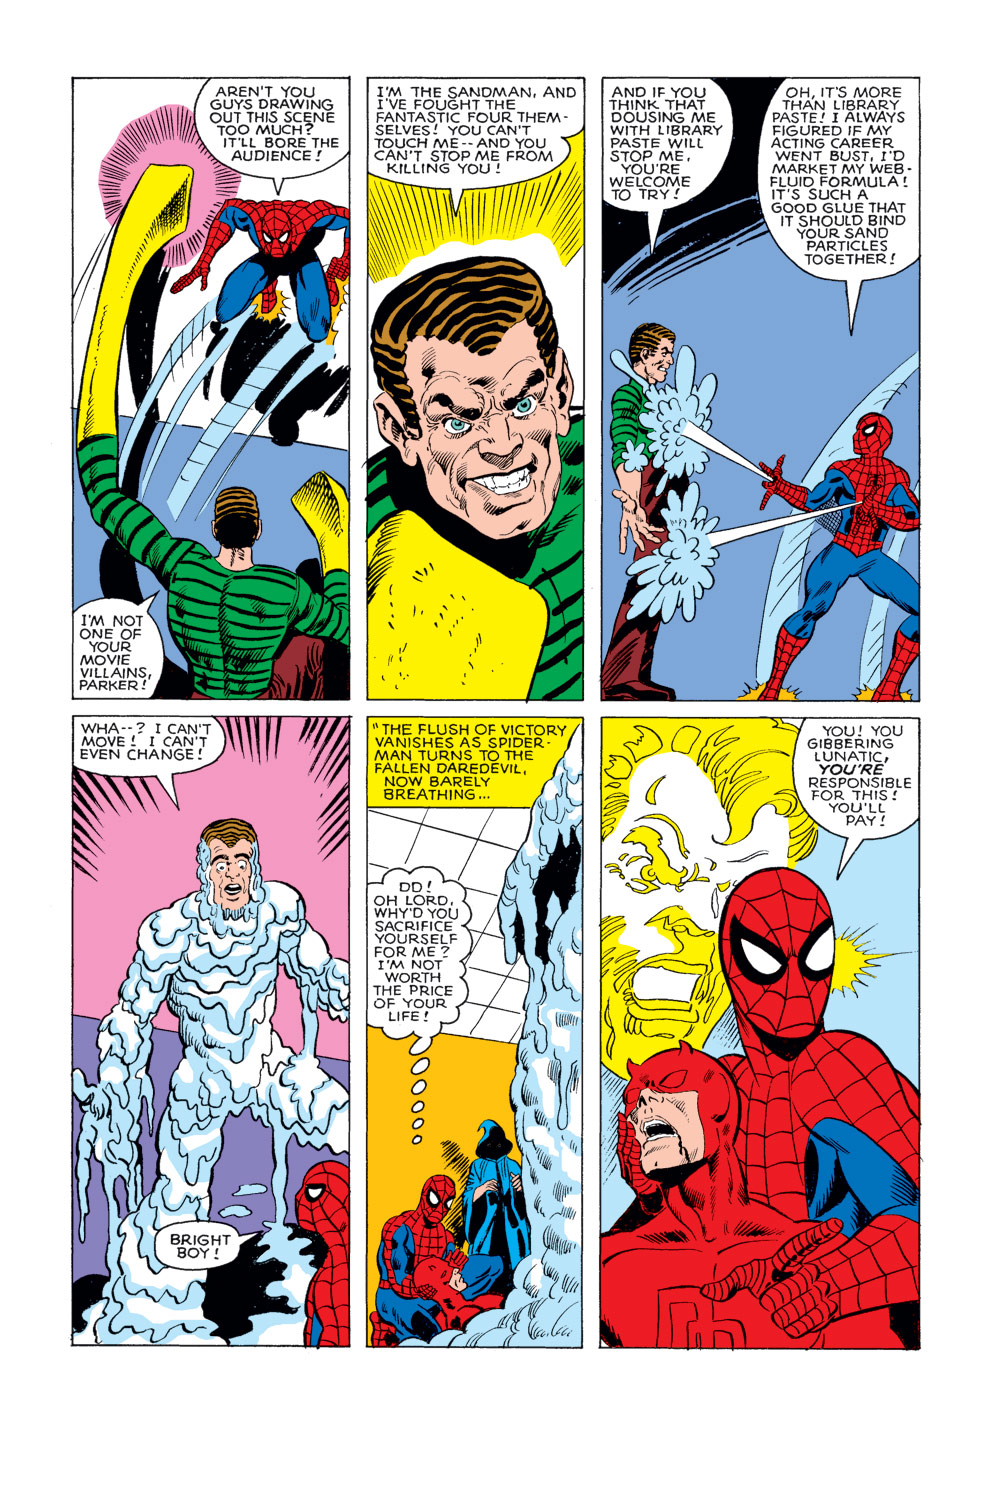 What If? (1977) issue 19 - Spider-Man had never become a crimefighter - Page 34